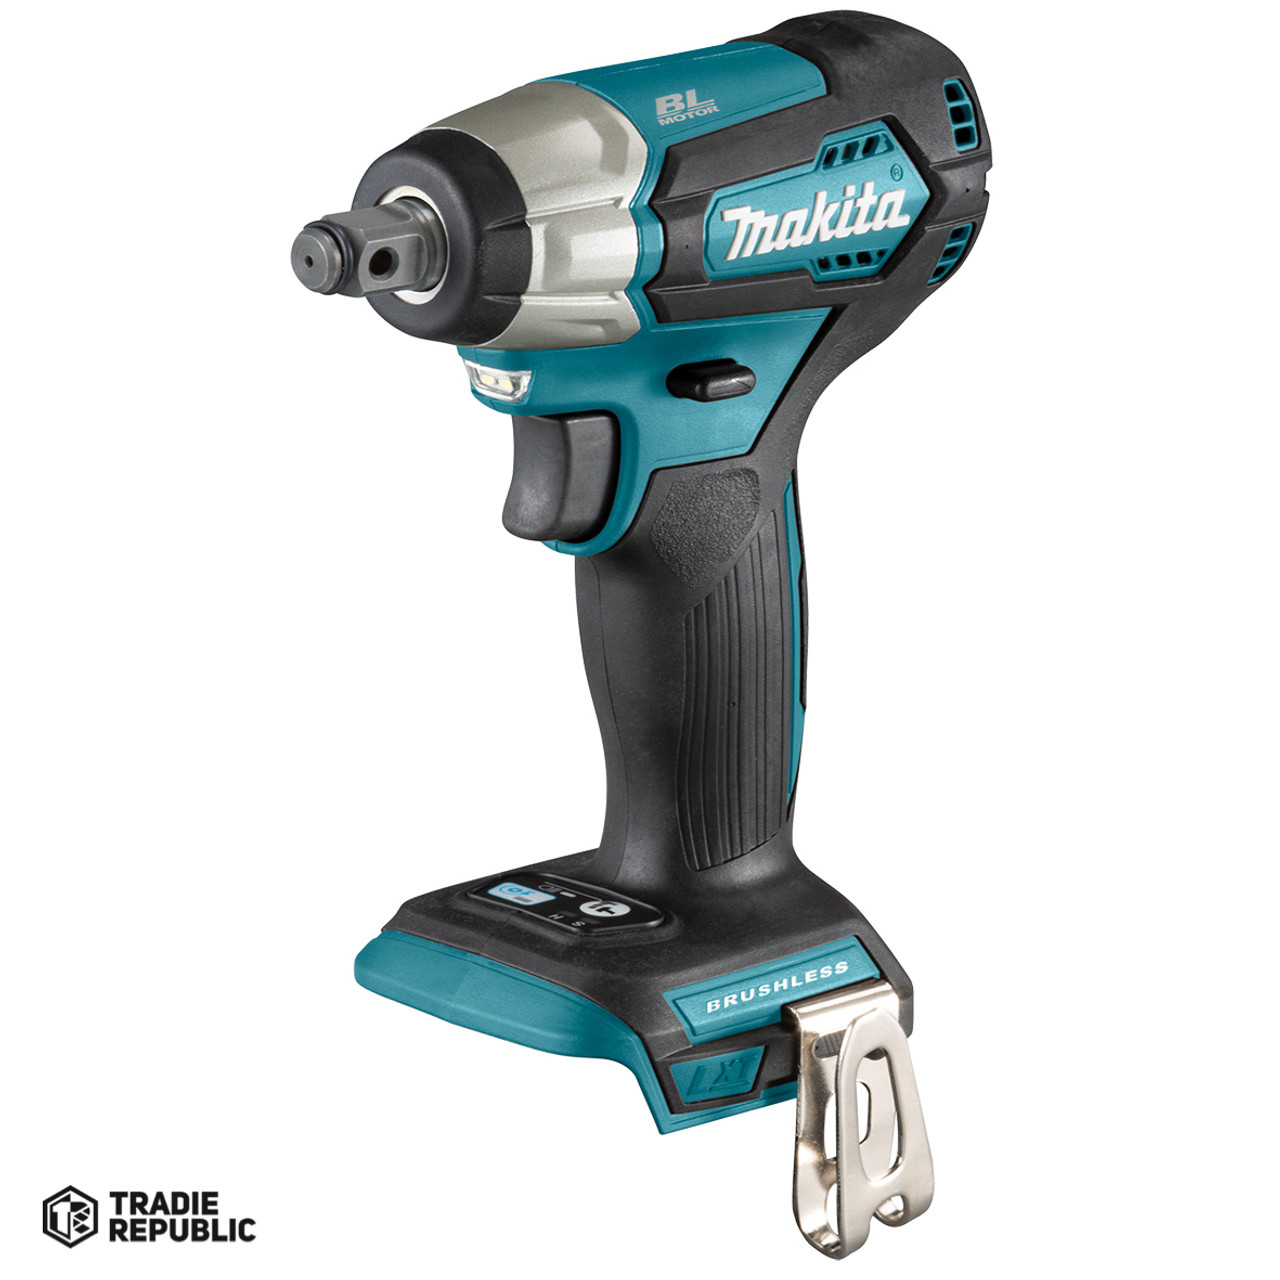 DTW181Z Makita 18V LXT Sub-Compact Brushless 1/2 Sq. Drive Impact Wrench, Tool Only